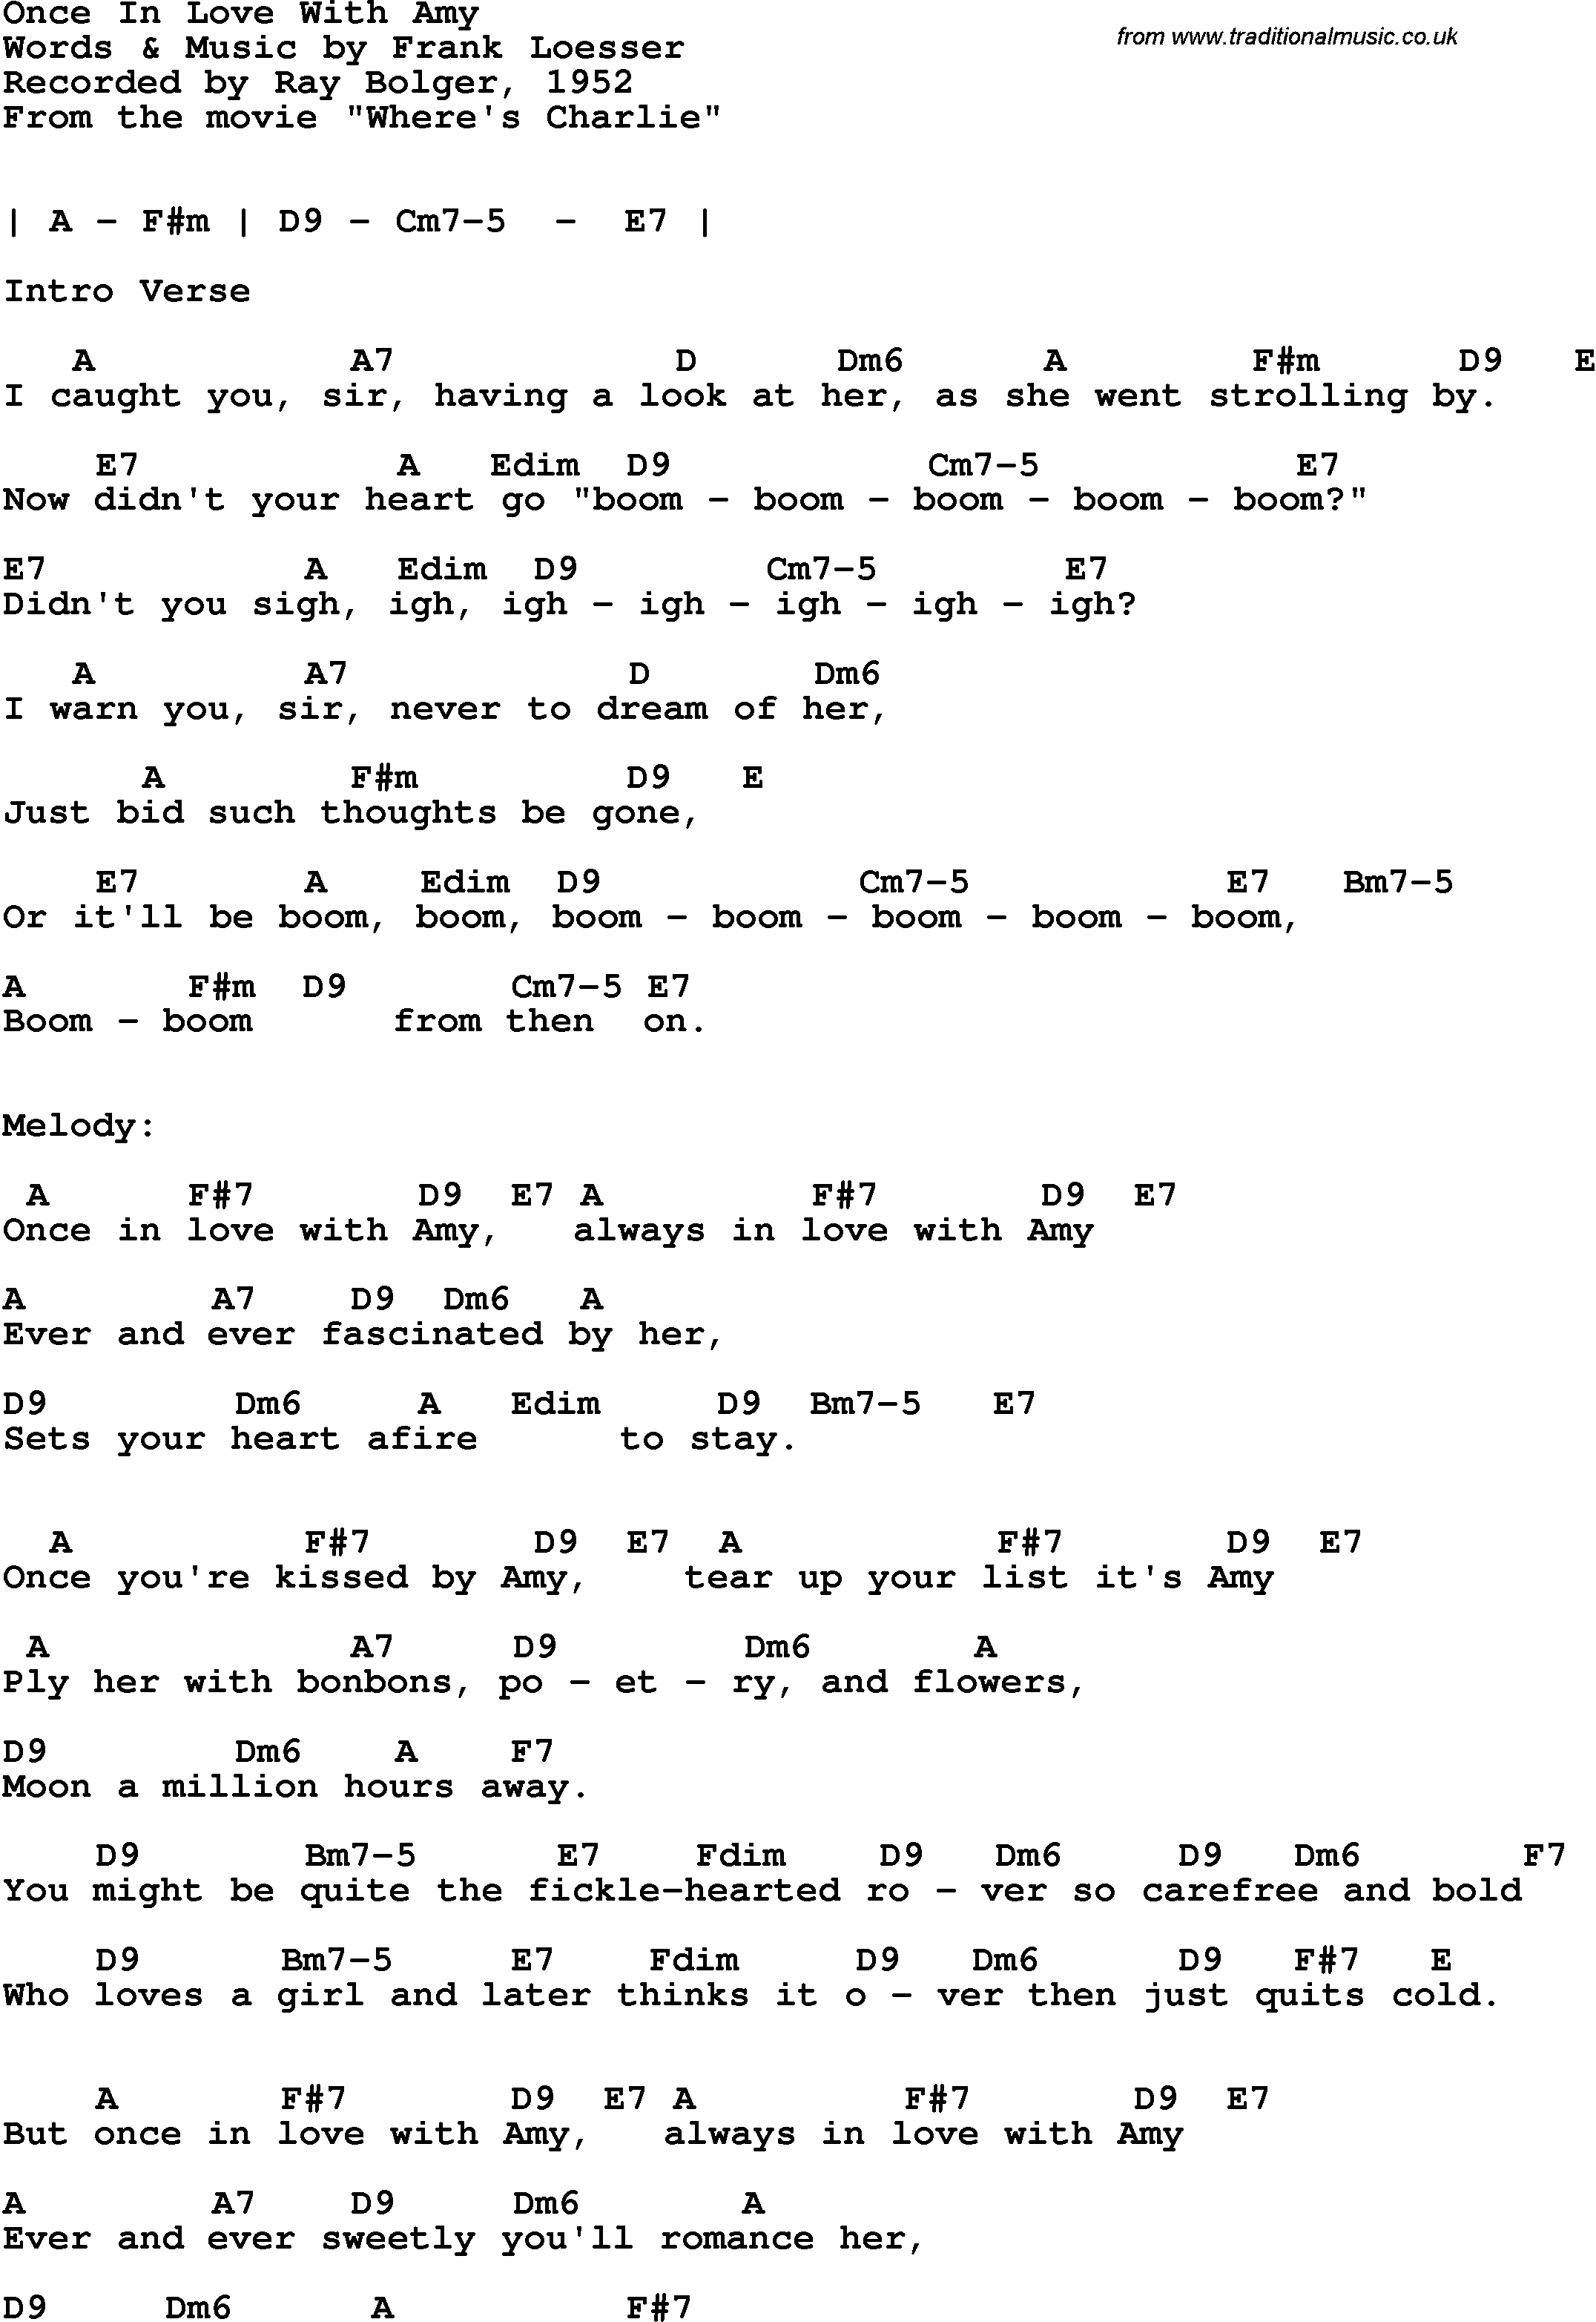 Song Lyrics with guitar chords for Once In Love With Amy - Ray Bolger, 1952